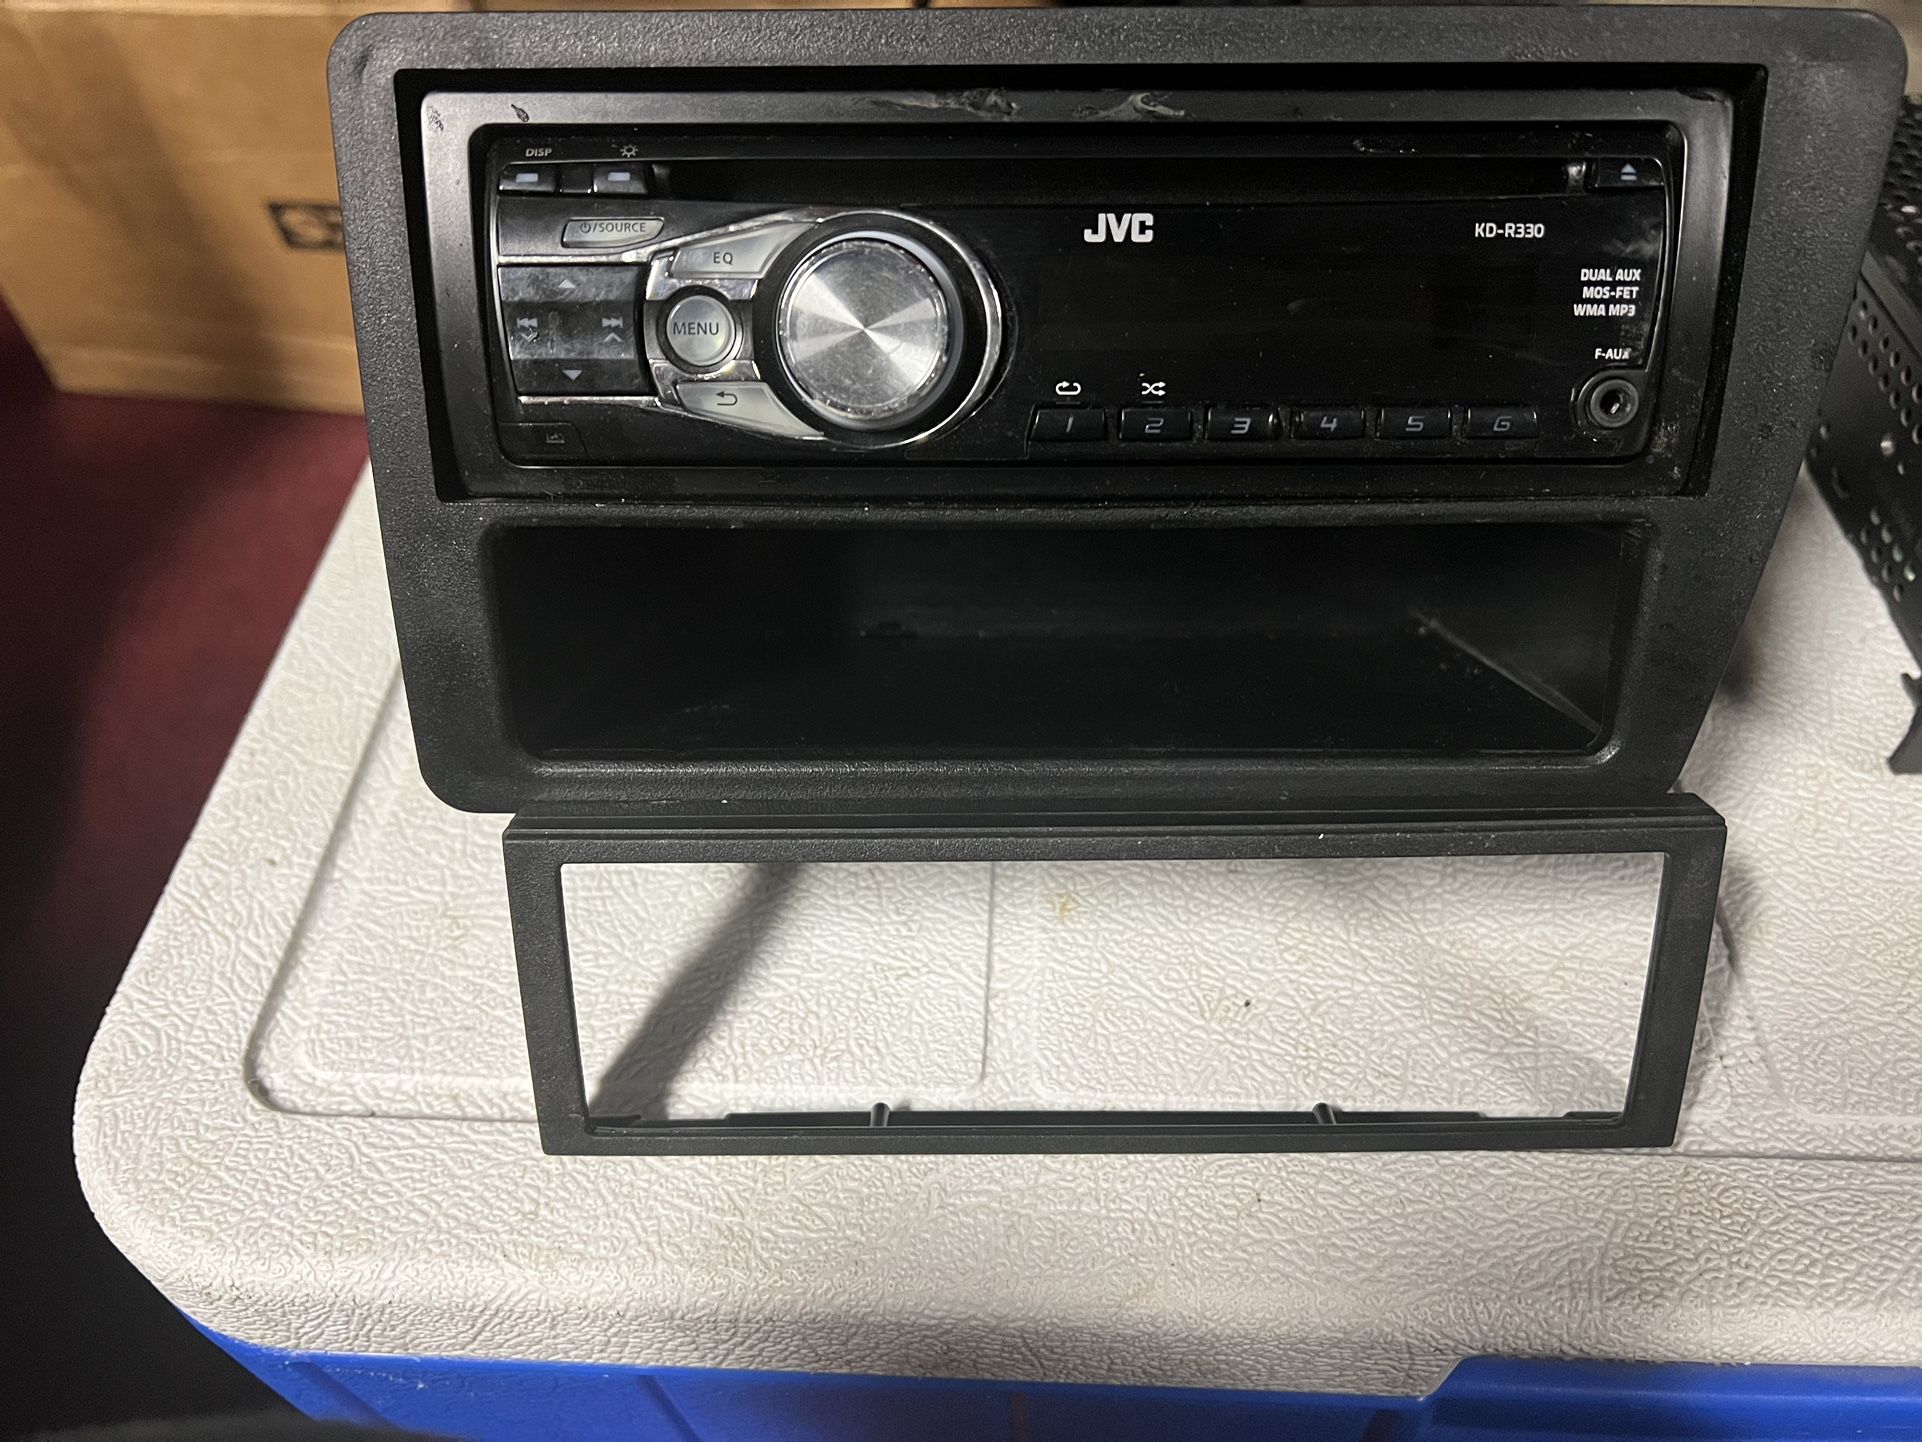  At Stereo  Cd Touch Aux USB Ports   W Remote Control 